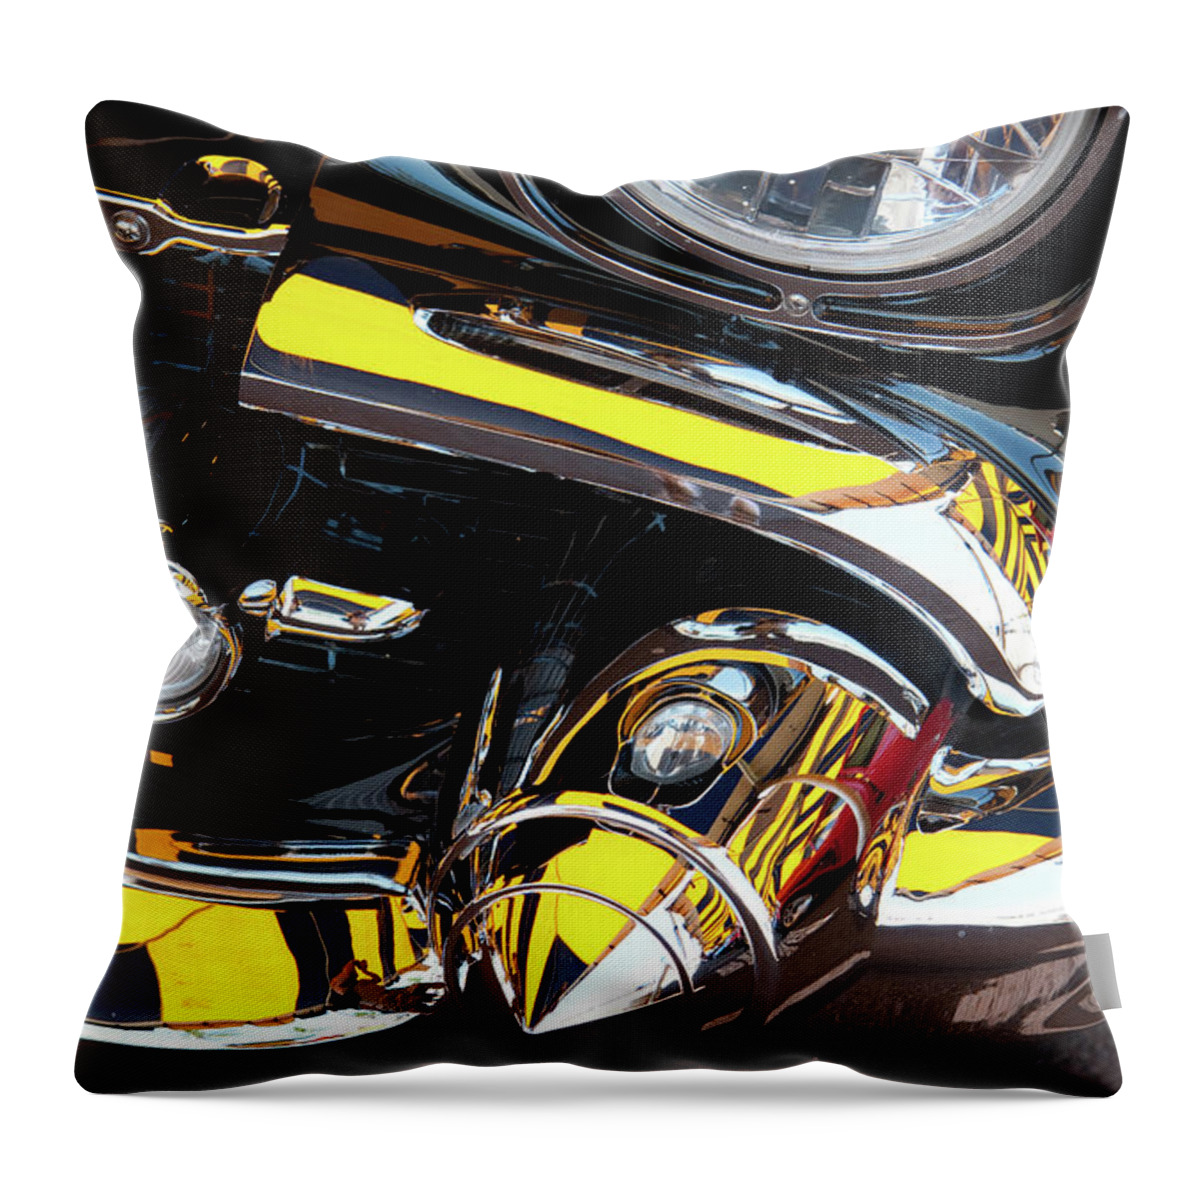 Vehicle Throw Pillow featuring the photograph 1957 Chevy by Roger Mullenhour